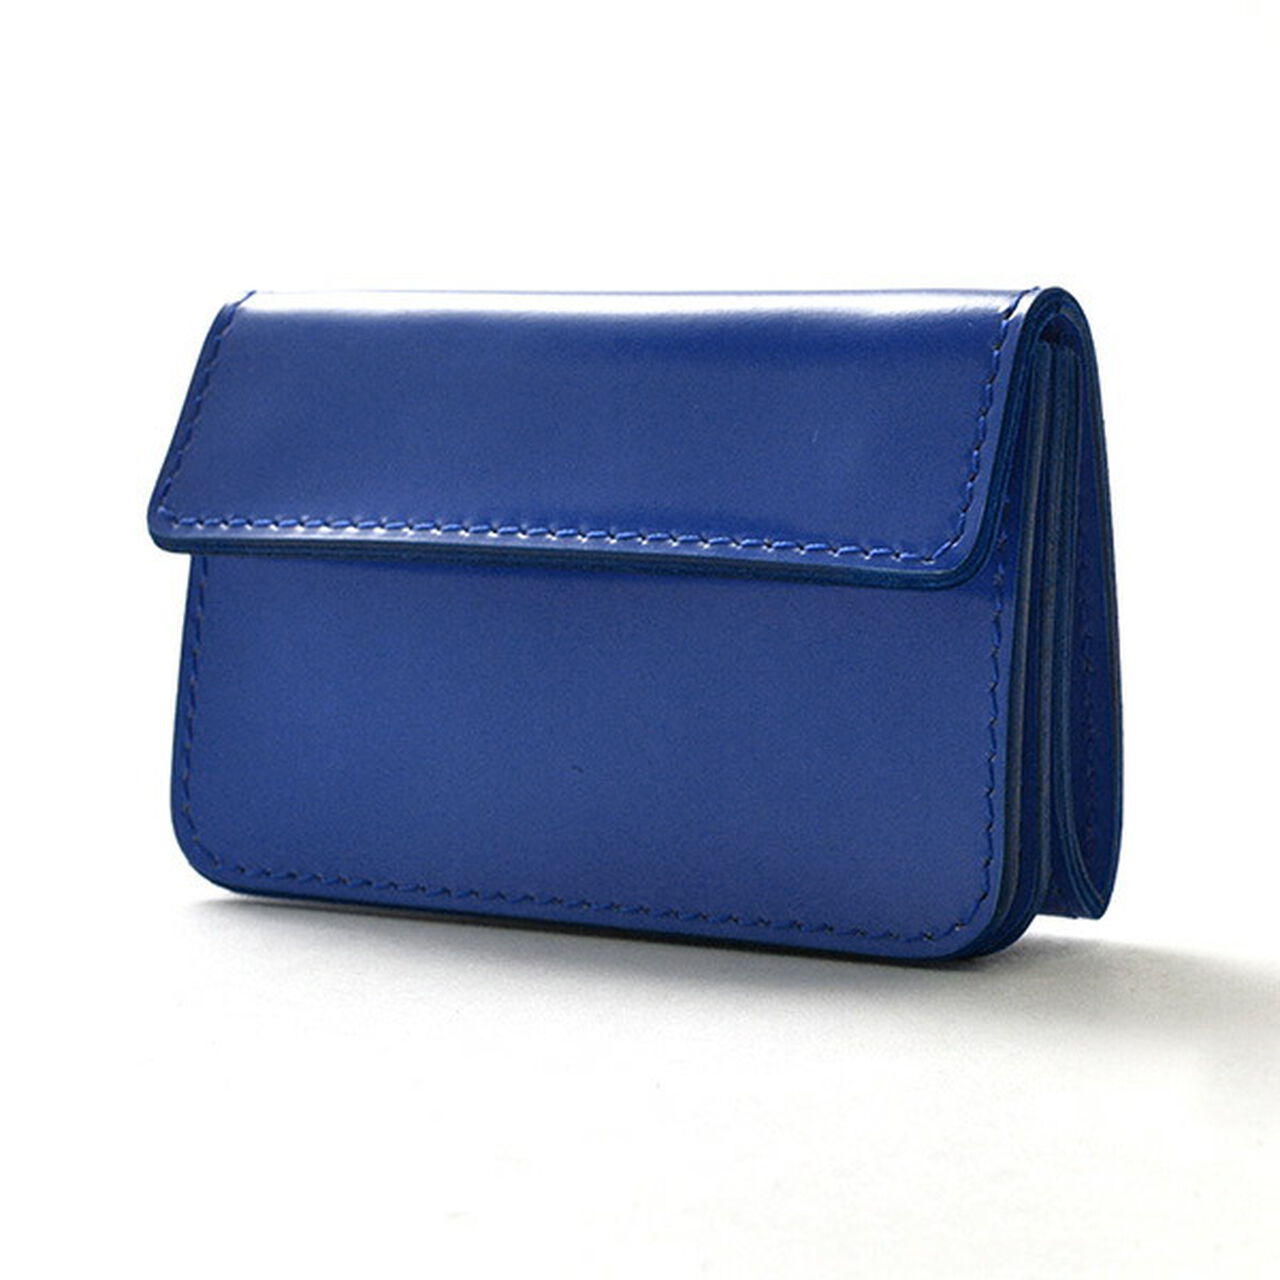 Bellows Compact Wallet,Blue, large image number 0